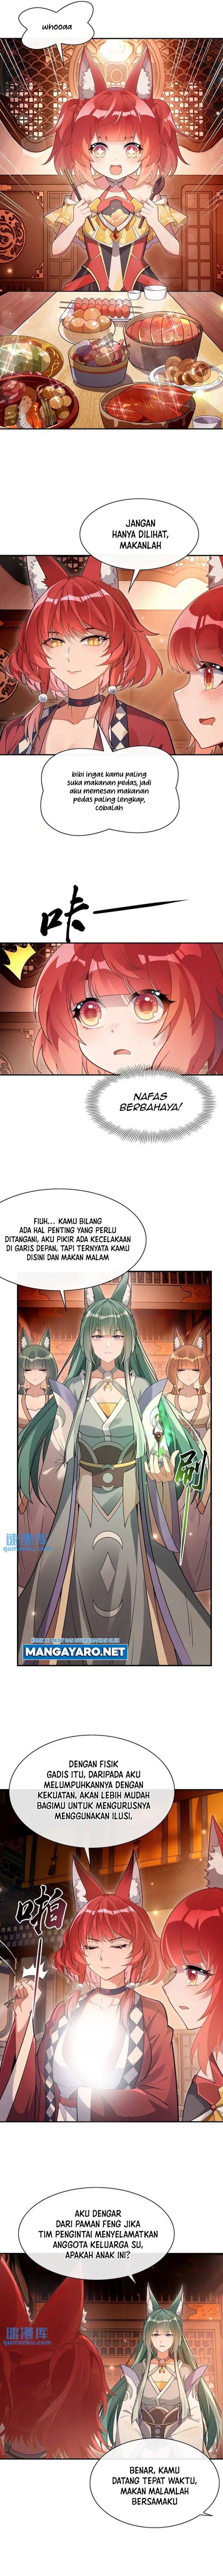 Dilarang COPAS - situs resmi www.mangacanblog.com - Komik my female apprentices are all big shots from the future 209 - chapter 209 210 Indonesia my female apprentices are all big shots from the future 209 - chapter 209 Terbaru 7|Baca Manga Komik Indonesia|Mangacan